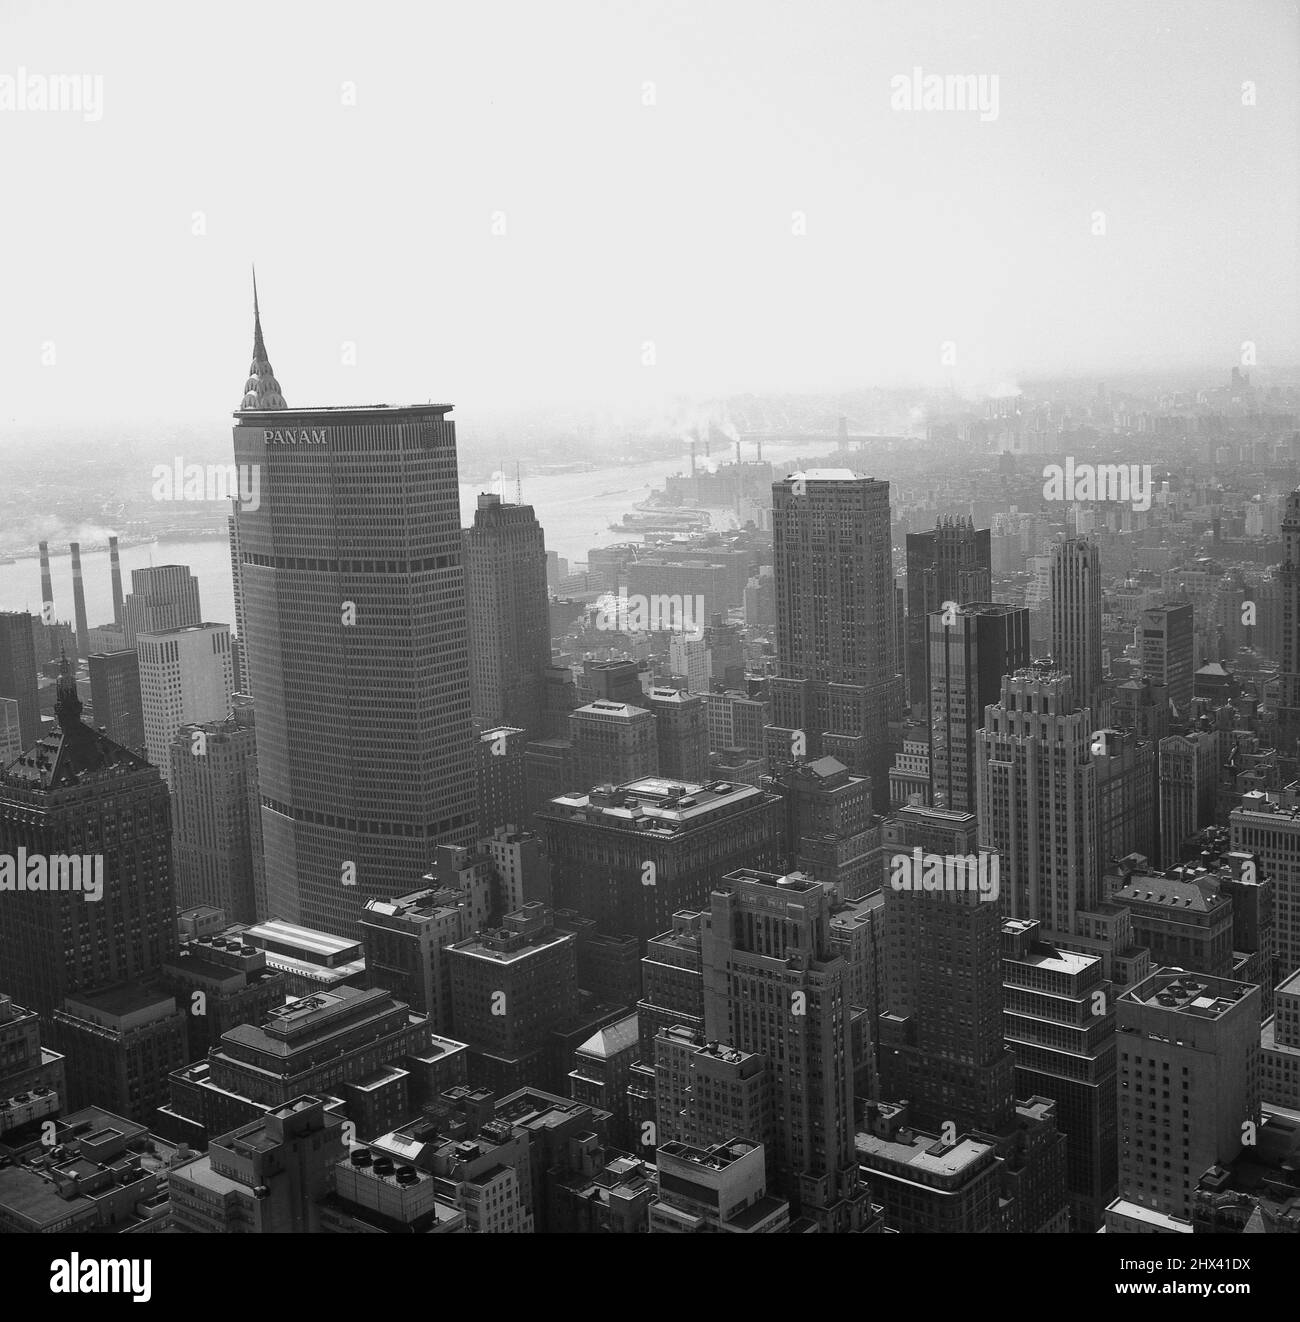 1960s, historical, view across the skyline of New York city, showing the skyscrapers, including the famous Pan Am building and others. In the distance the East river, NY, USA. Built in 1963 in the air space over the terminal of the New Central Railroad, the headquarters of Pan American World Airways was at the time, the largest private office structure in the world. Designed by Emery Roth & Sons, it was 'brutalist' in form. Stock Photo